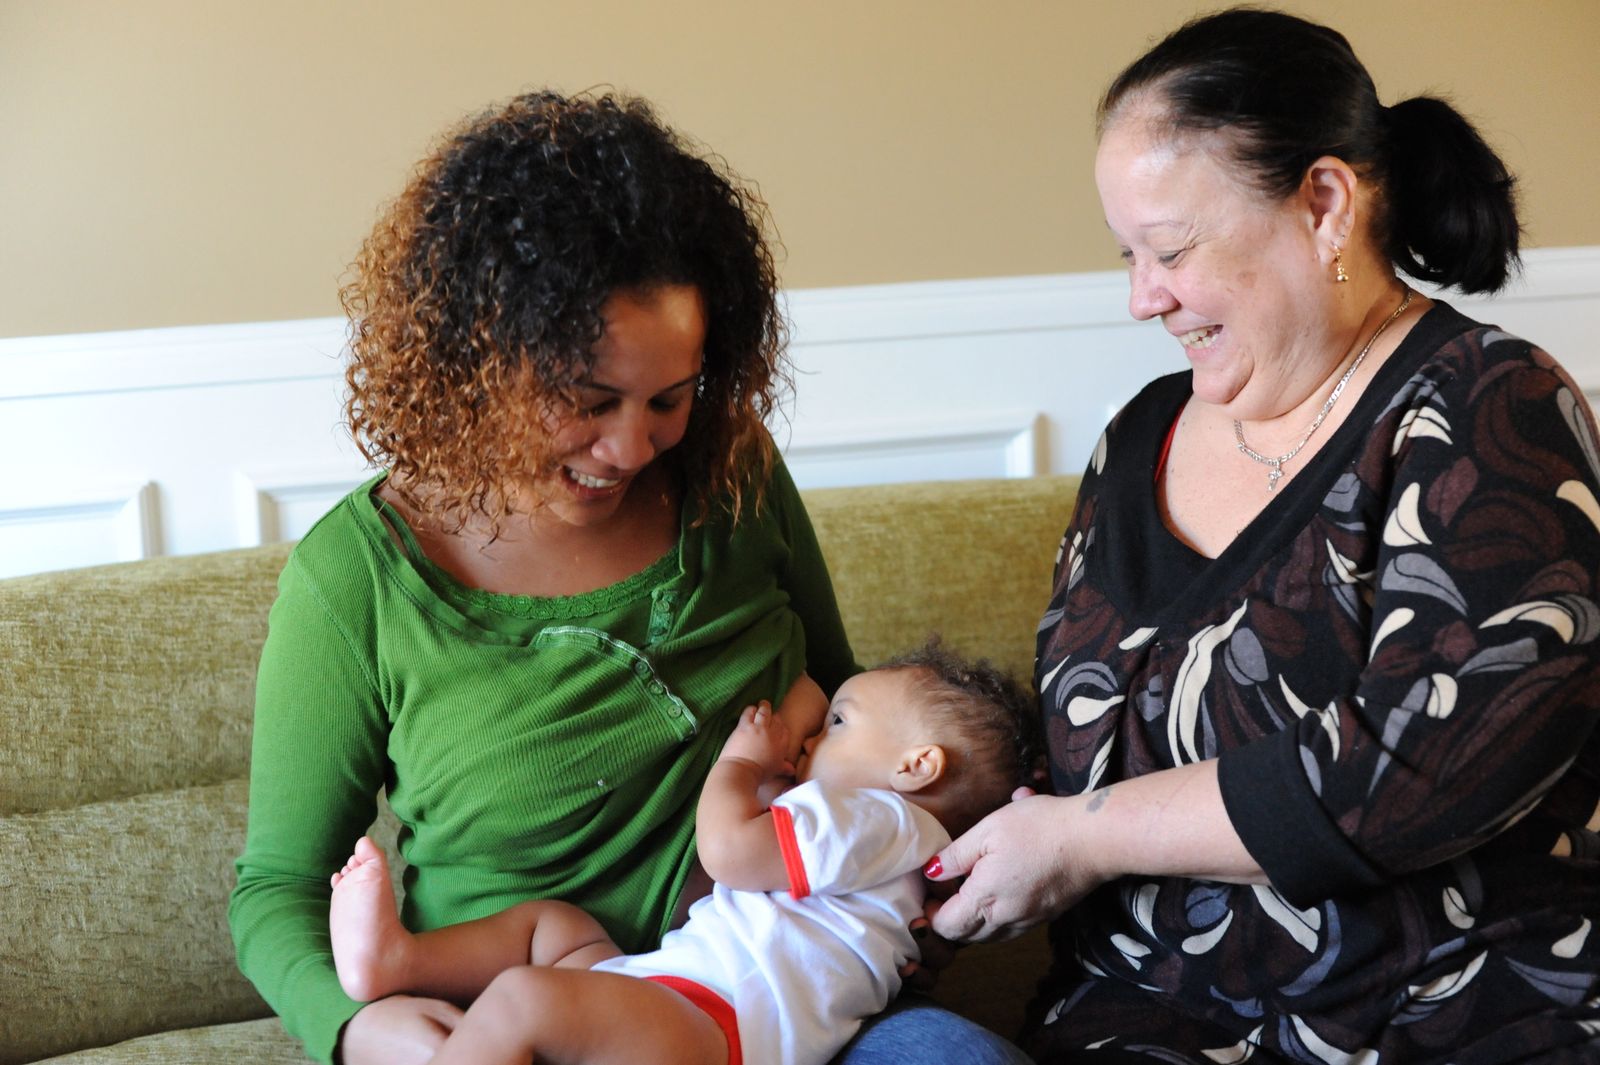 Young woman breastfeeding while an older woman offers support, both smiling.